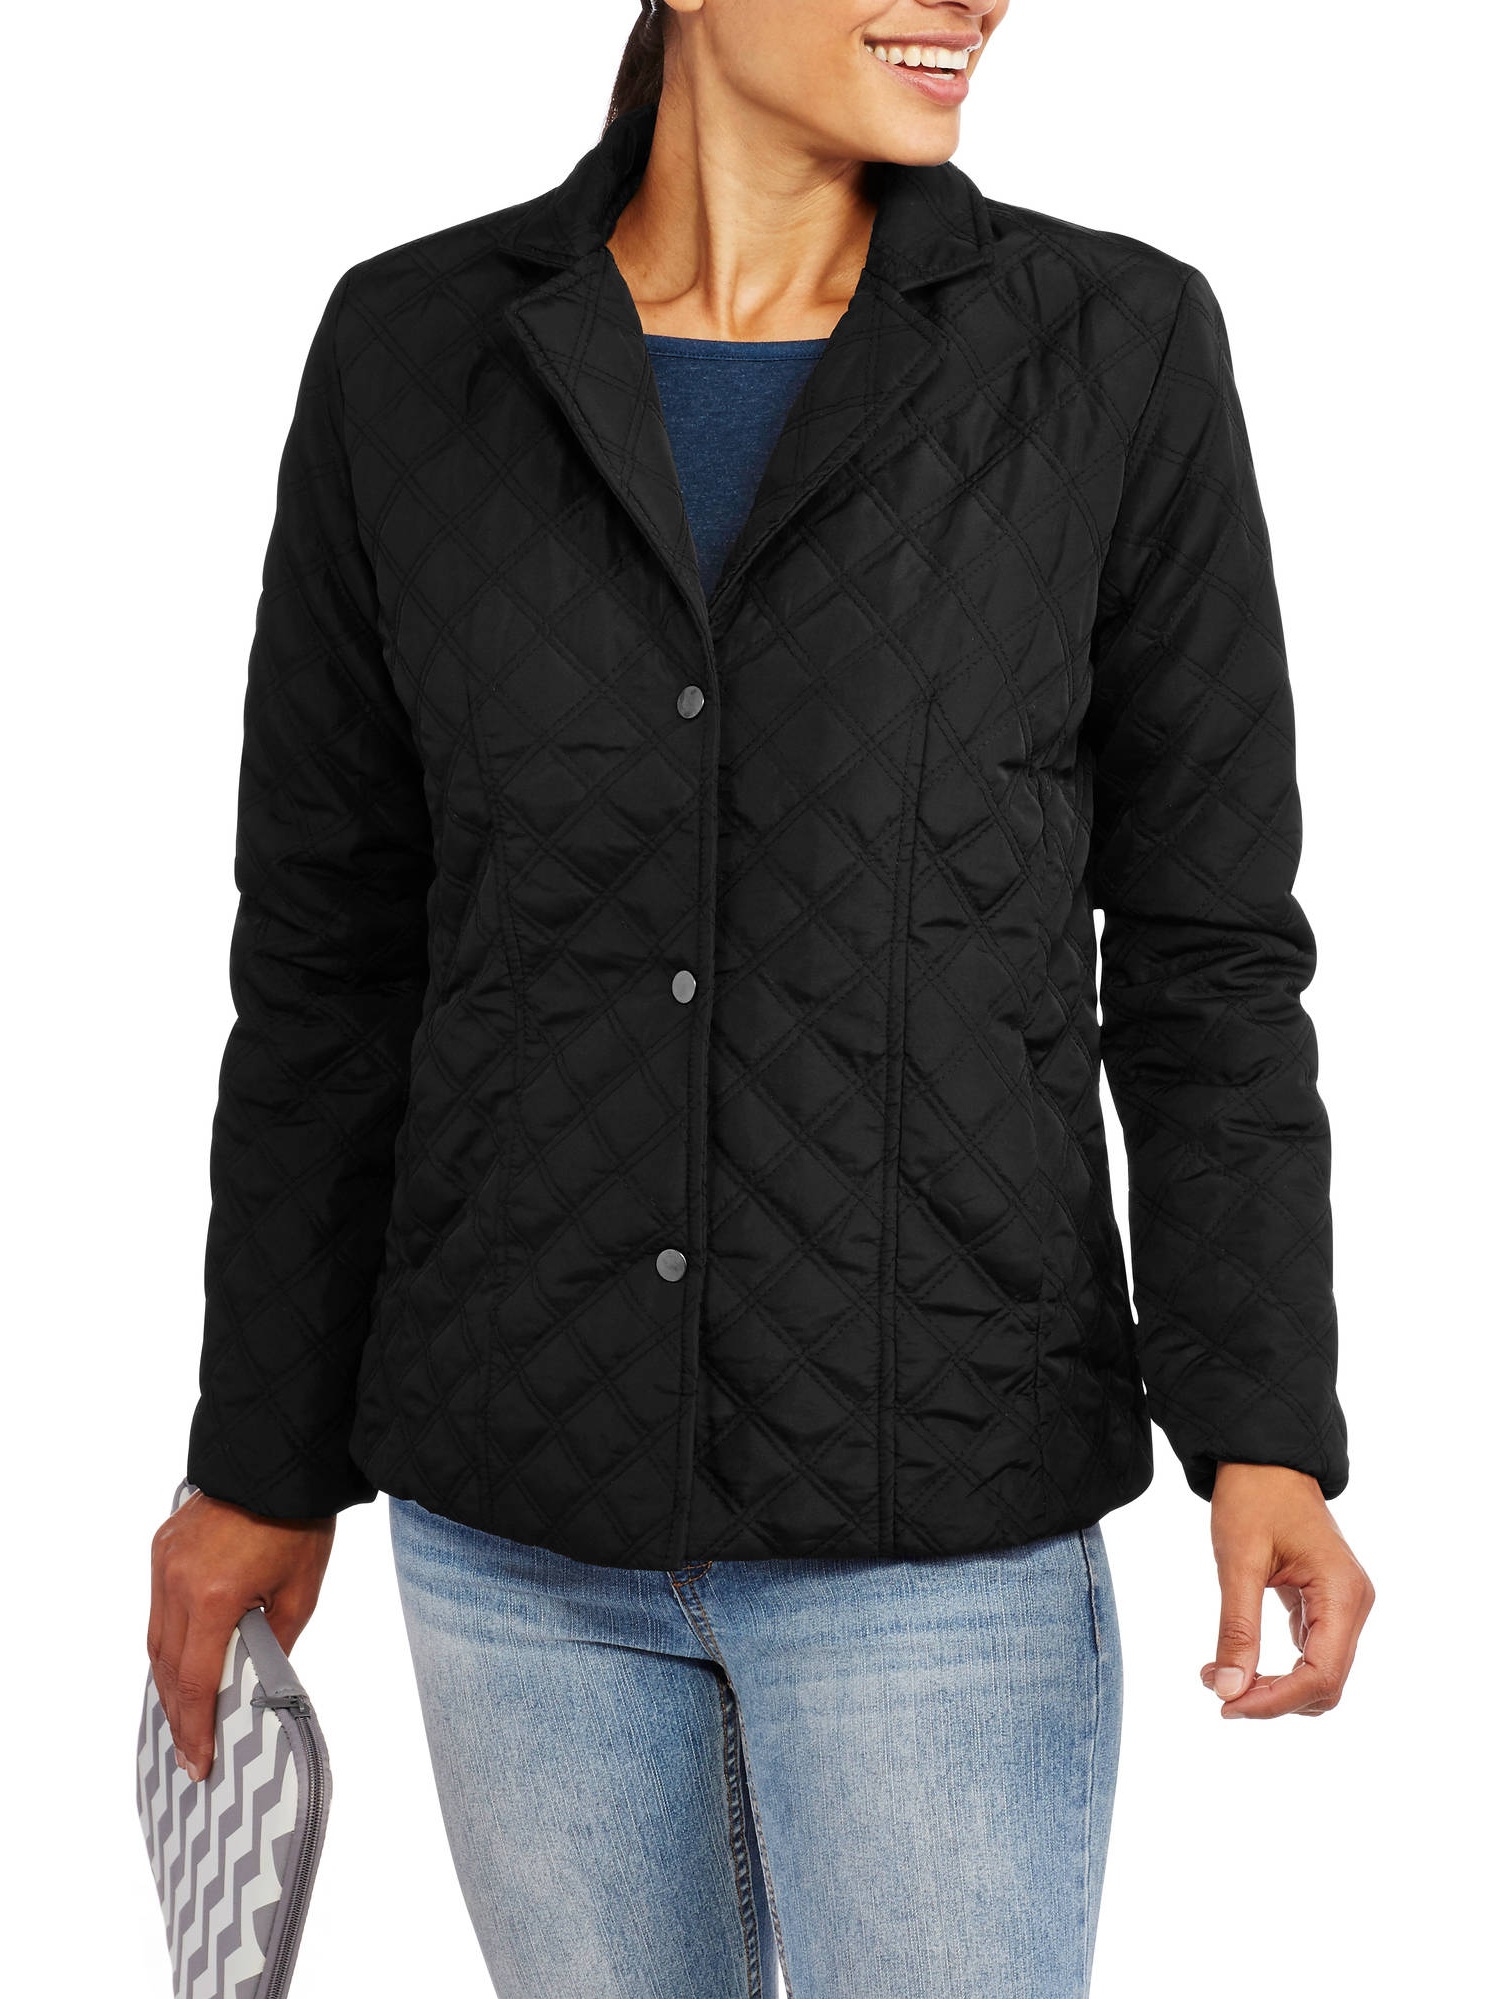 Women's Quilted Barn Jacket - image 1 of 2